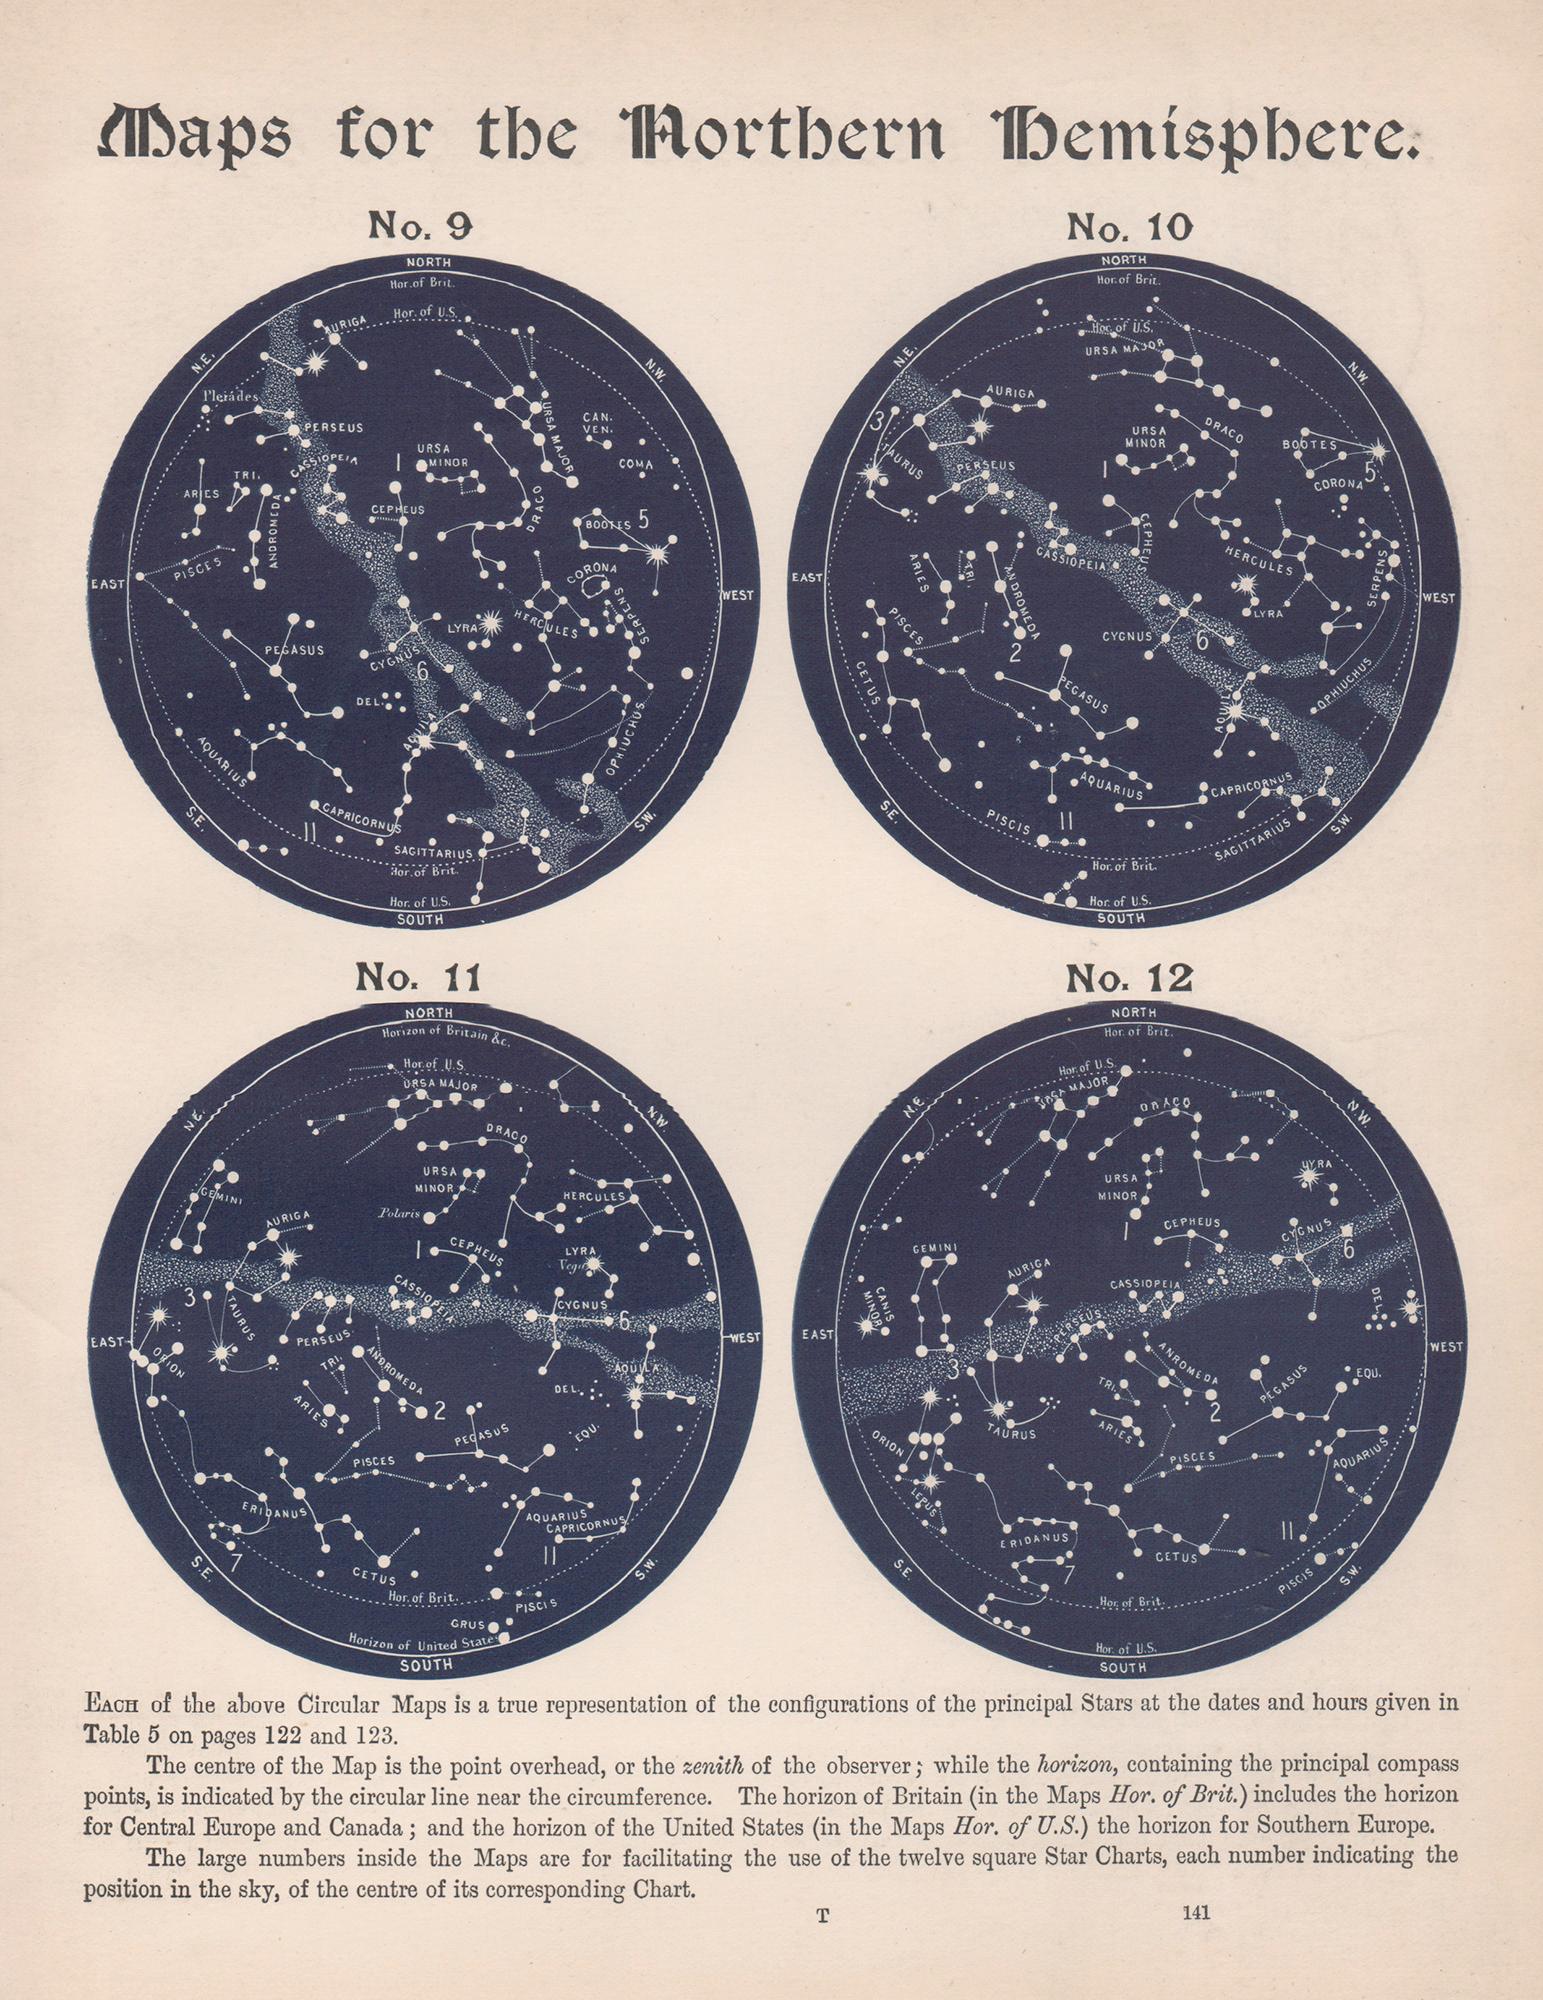 Maps for the Northern Hemisphere. Antique Astronomy star constellation print